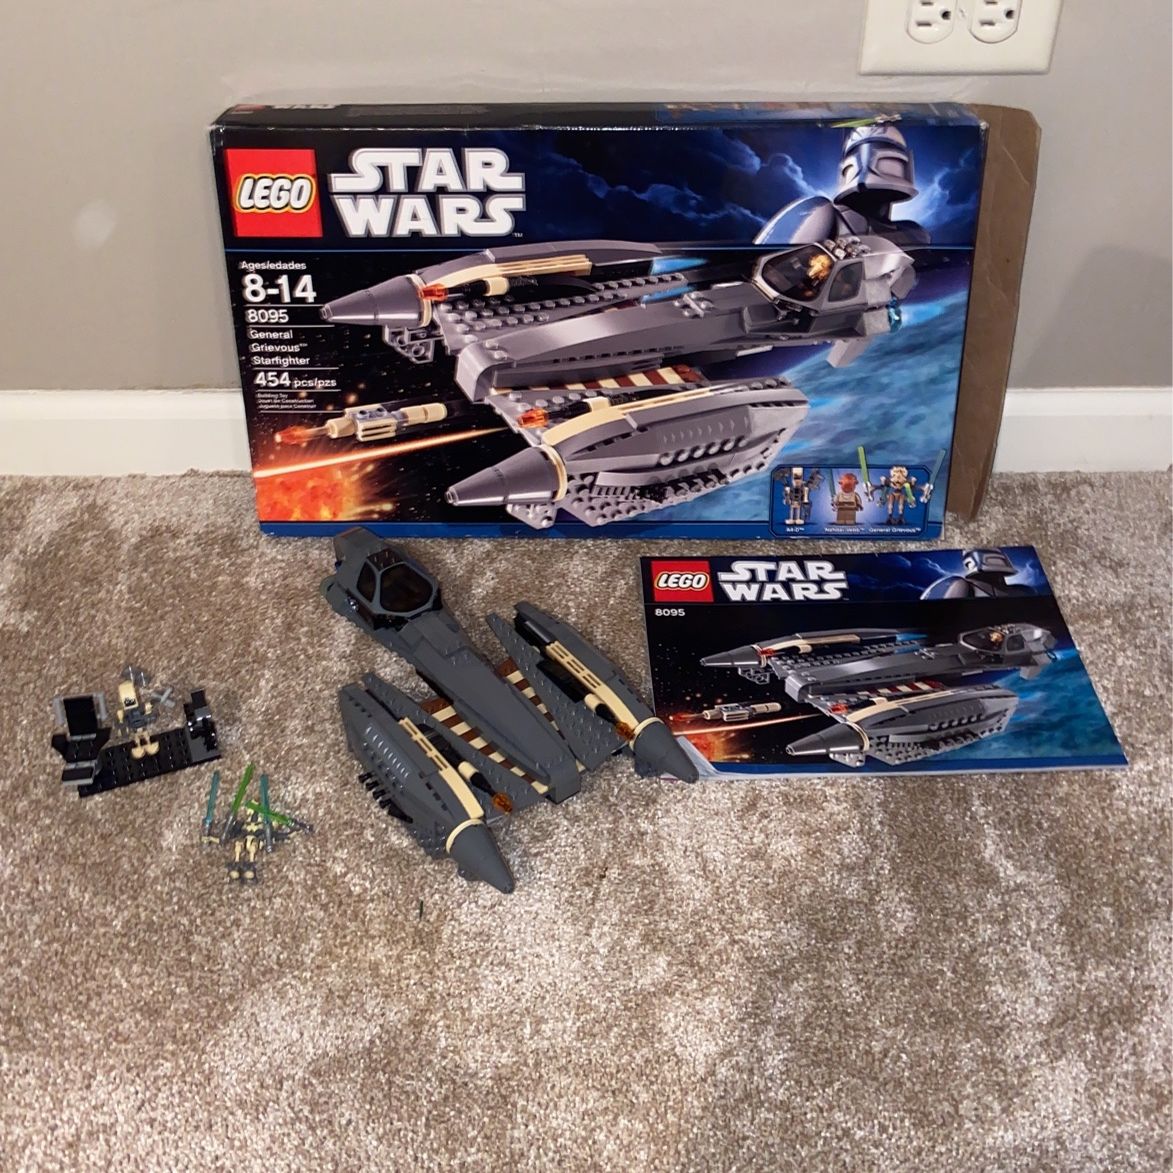 LEGO Star Wars General Grievous Starfighter for Sale in Plainfield, IL - OfferUp